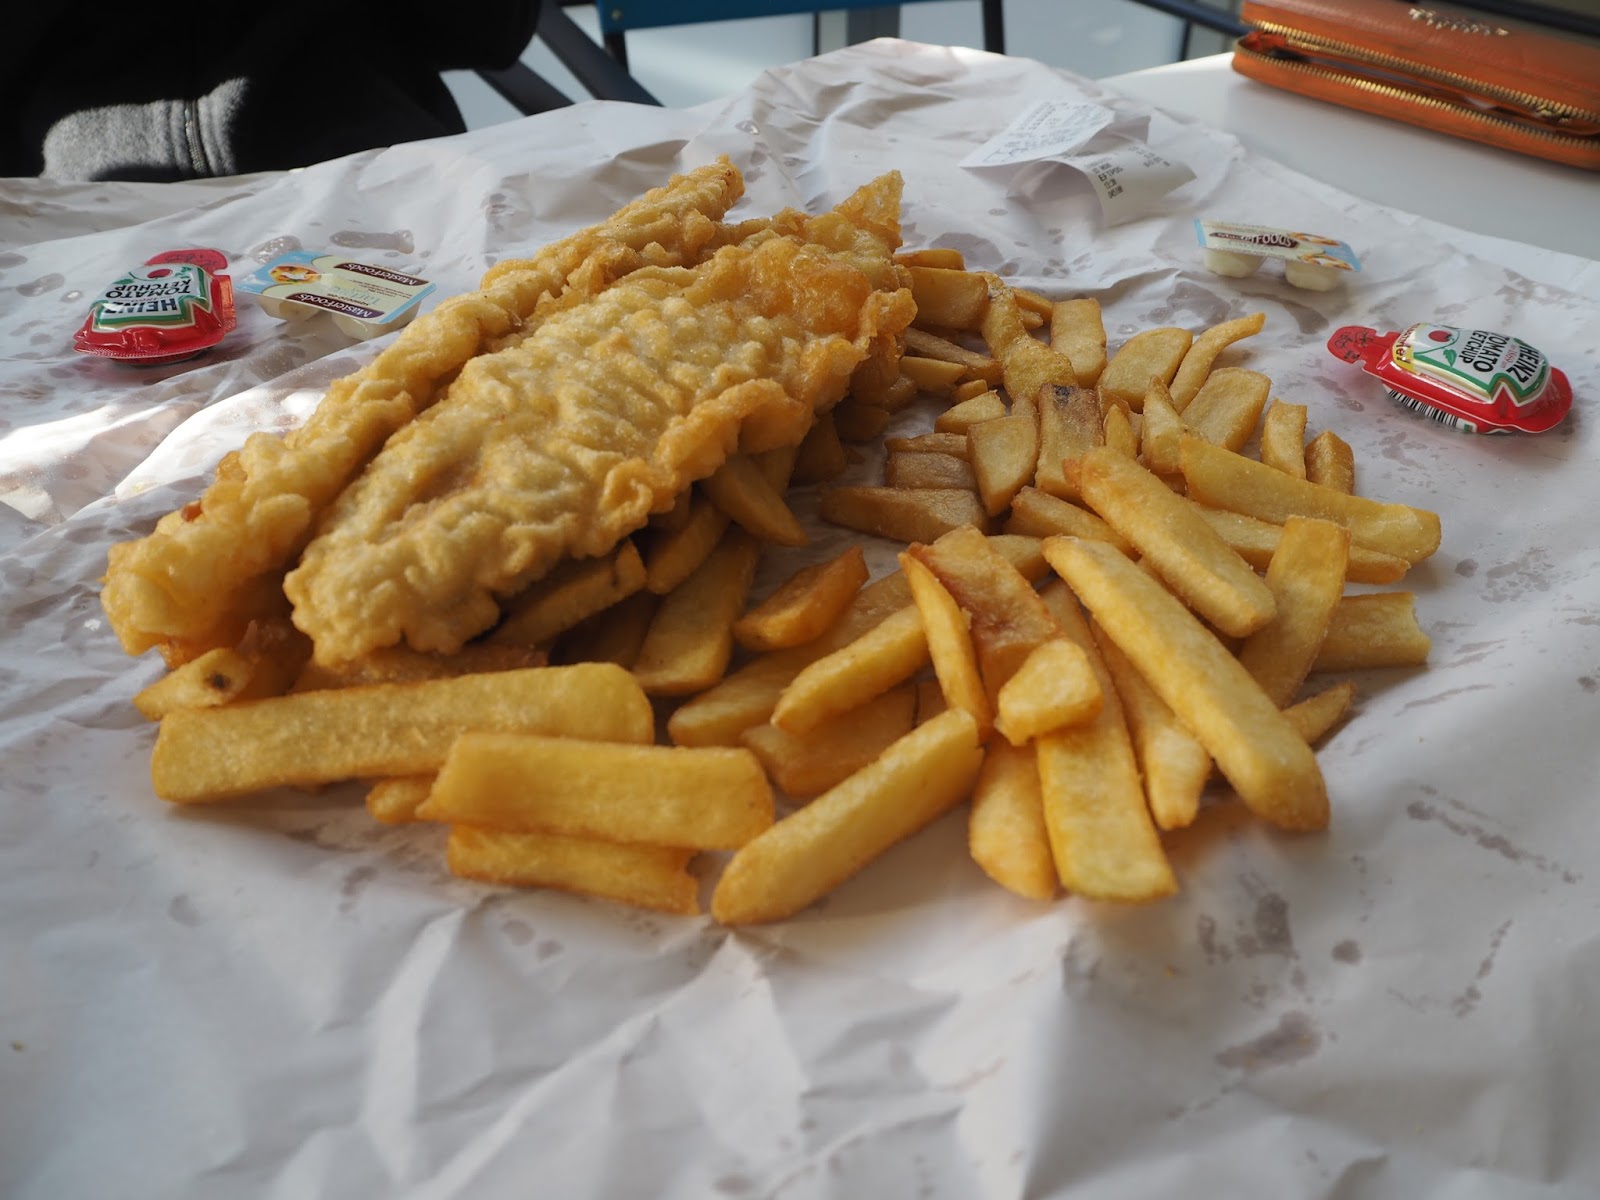 Fish and chips from Akaroa in New Zealand